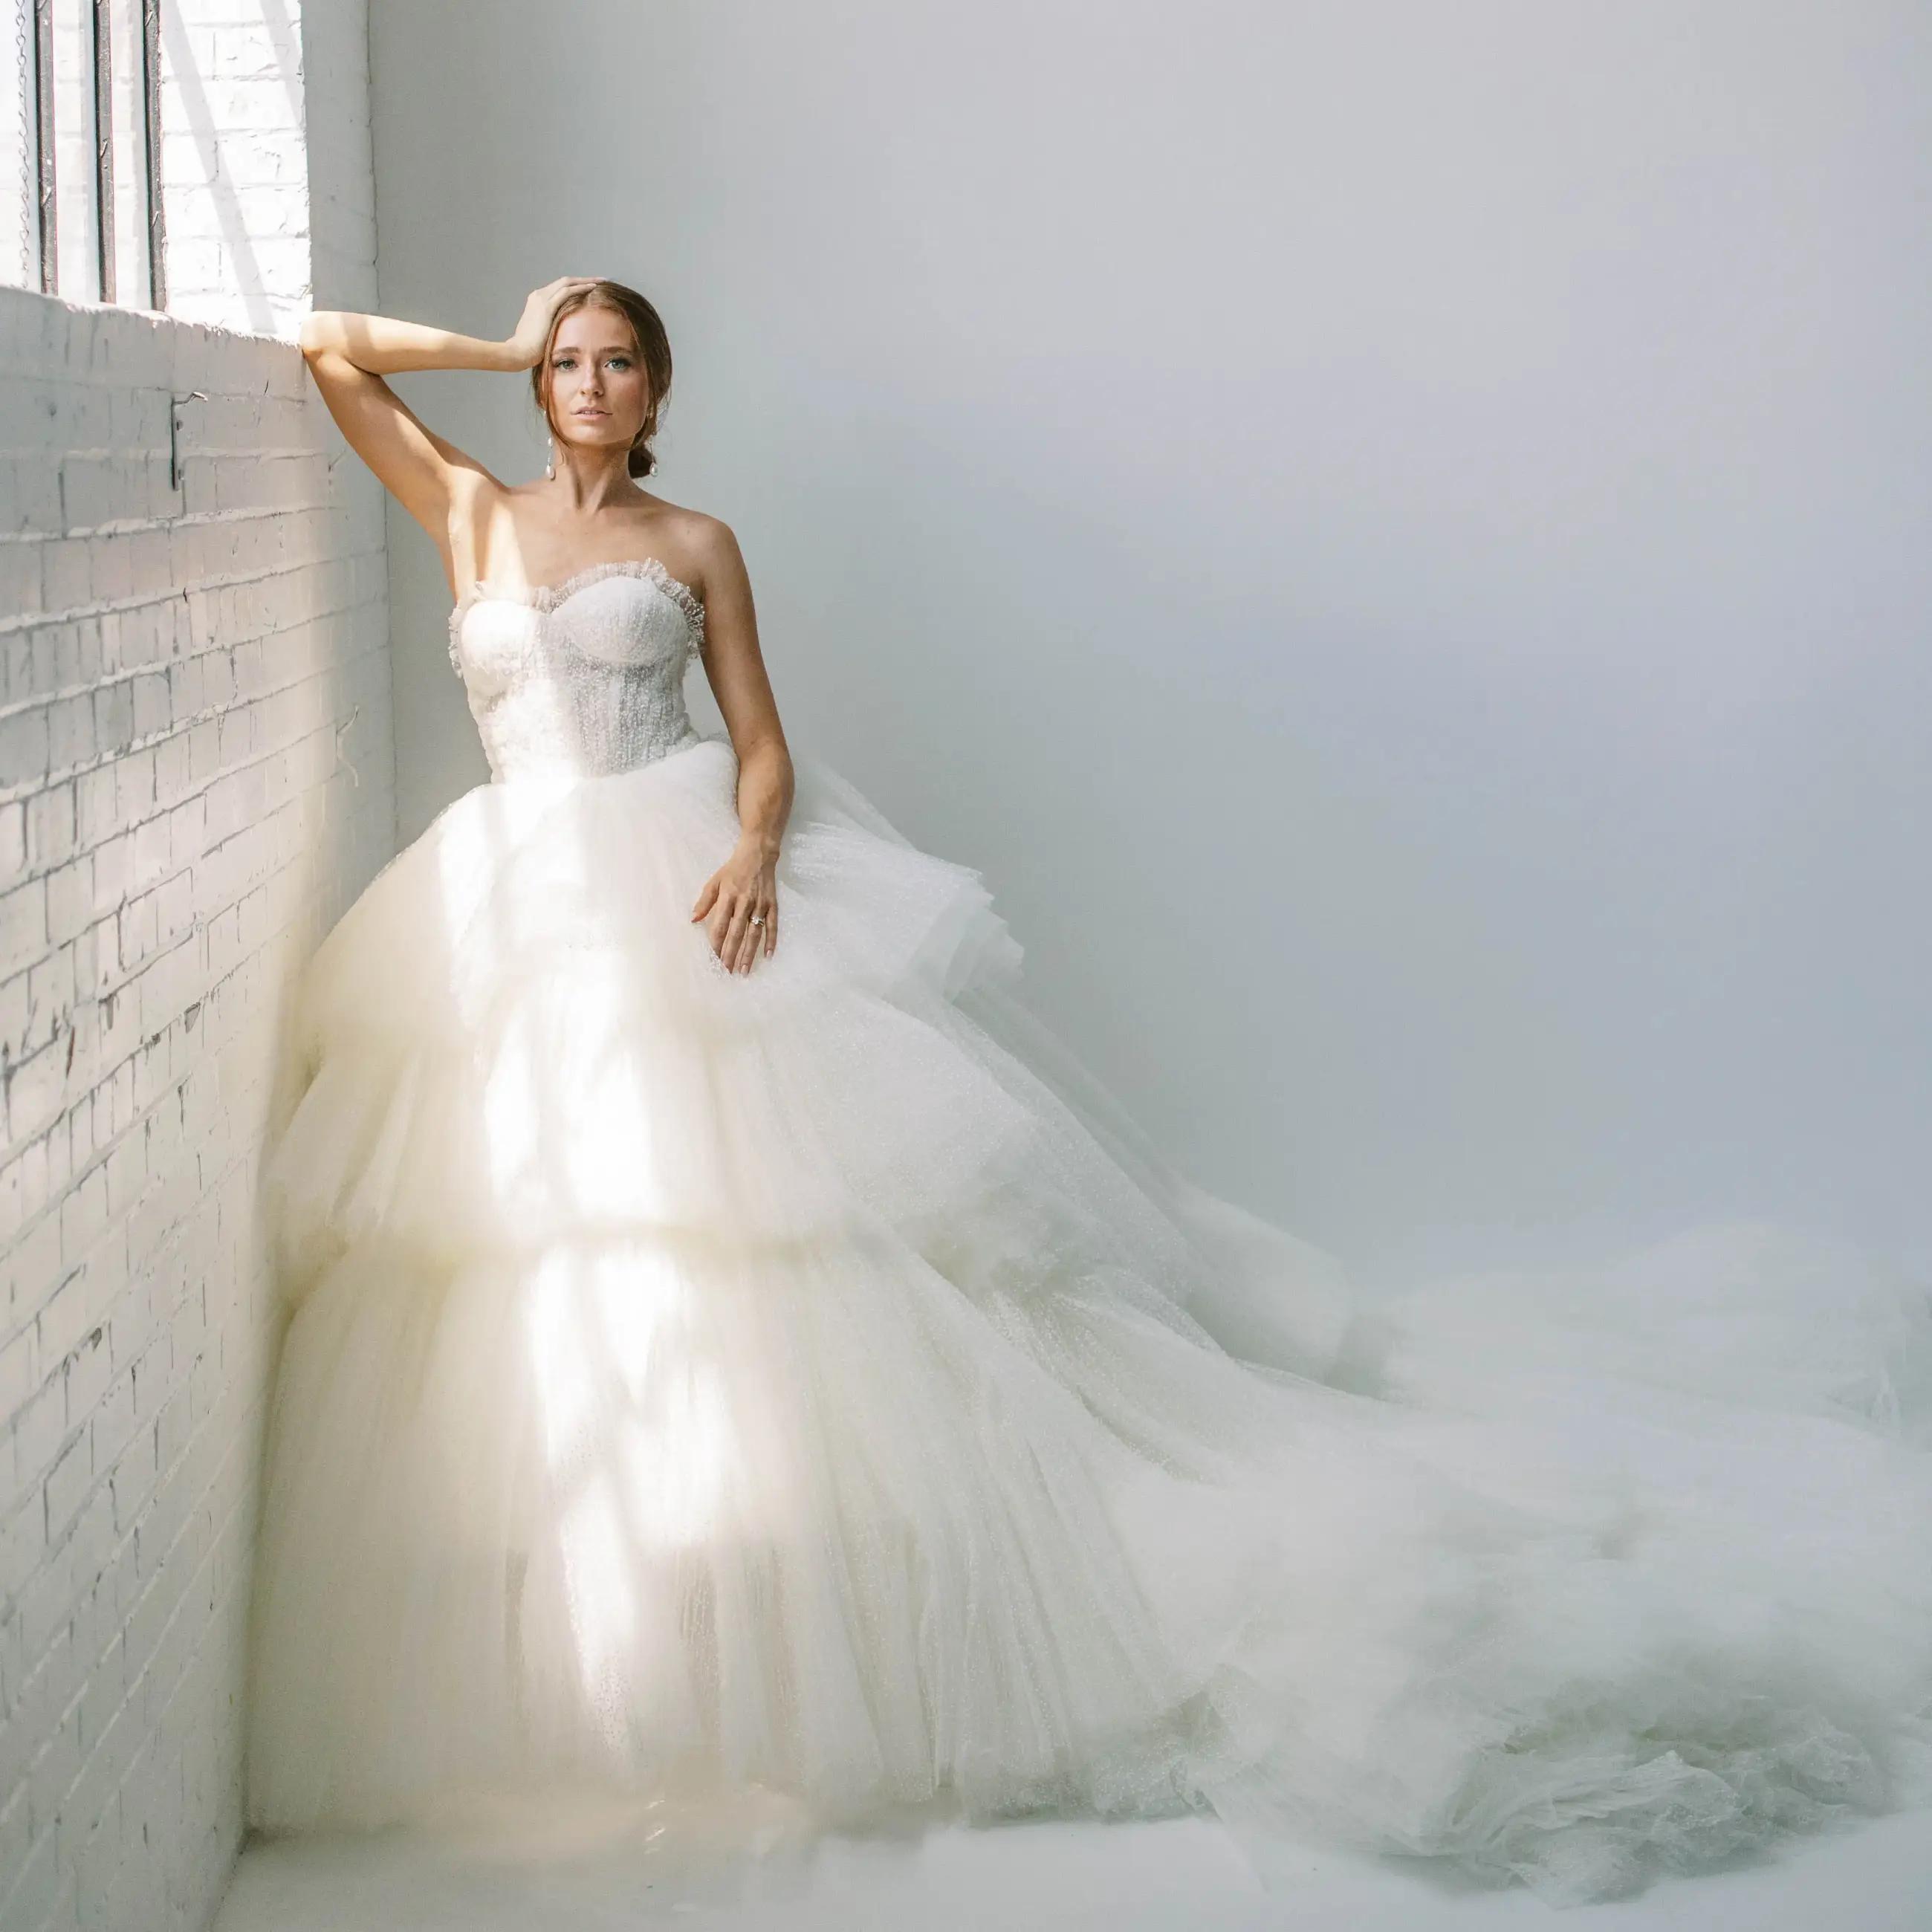 Ballgown or Mermaid? How to Pick Your Bridal Silhouette Image